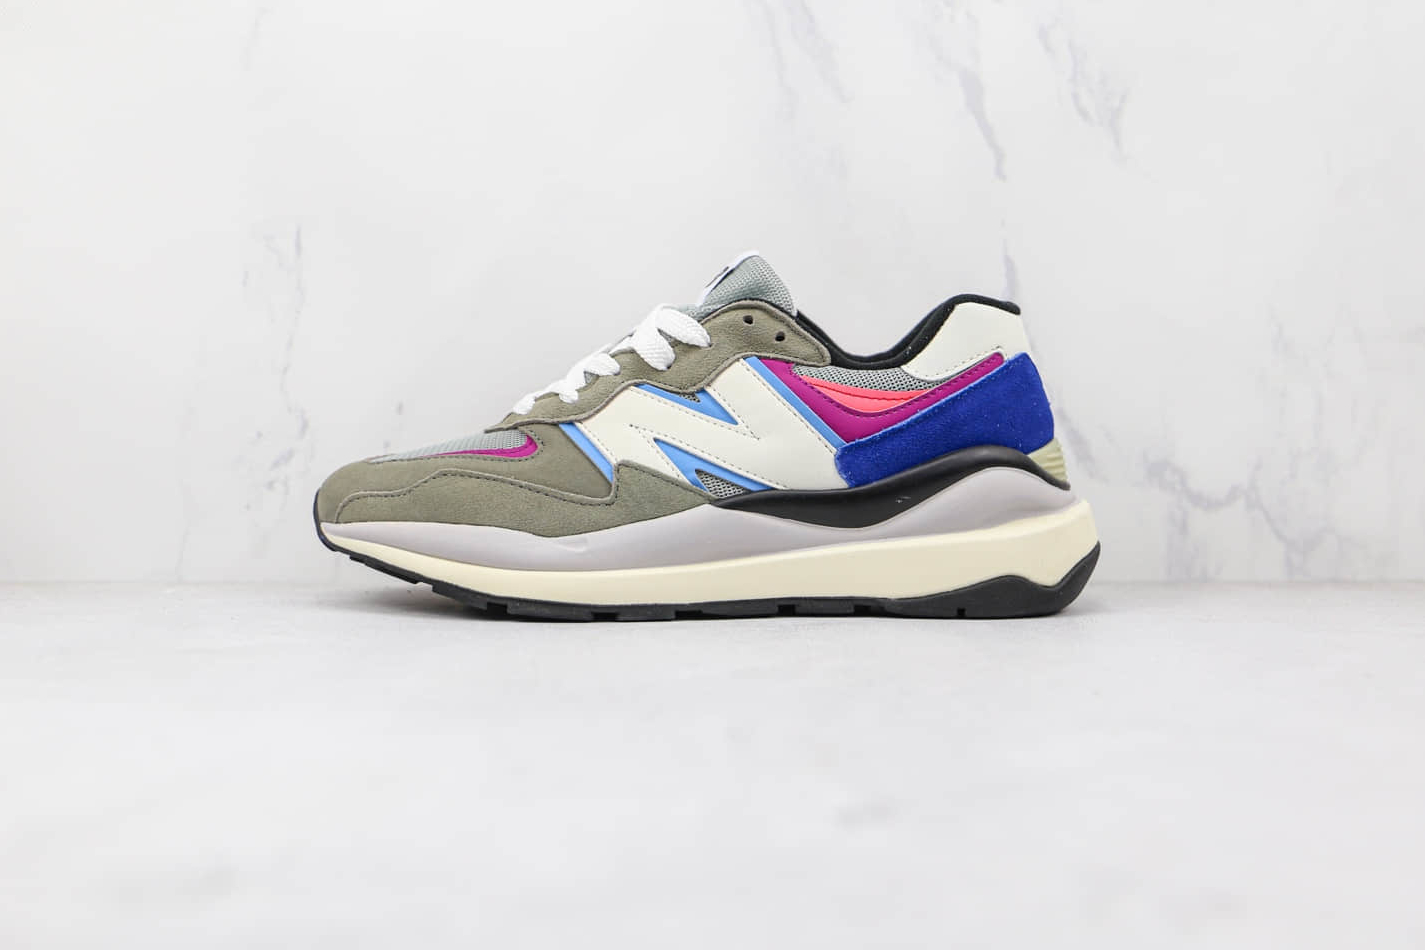 New Balance 57 40 'Incubation Pack - Grey Pink Zing' M5740DD1 - Stylish and Sporty Sneakers